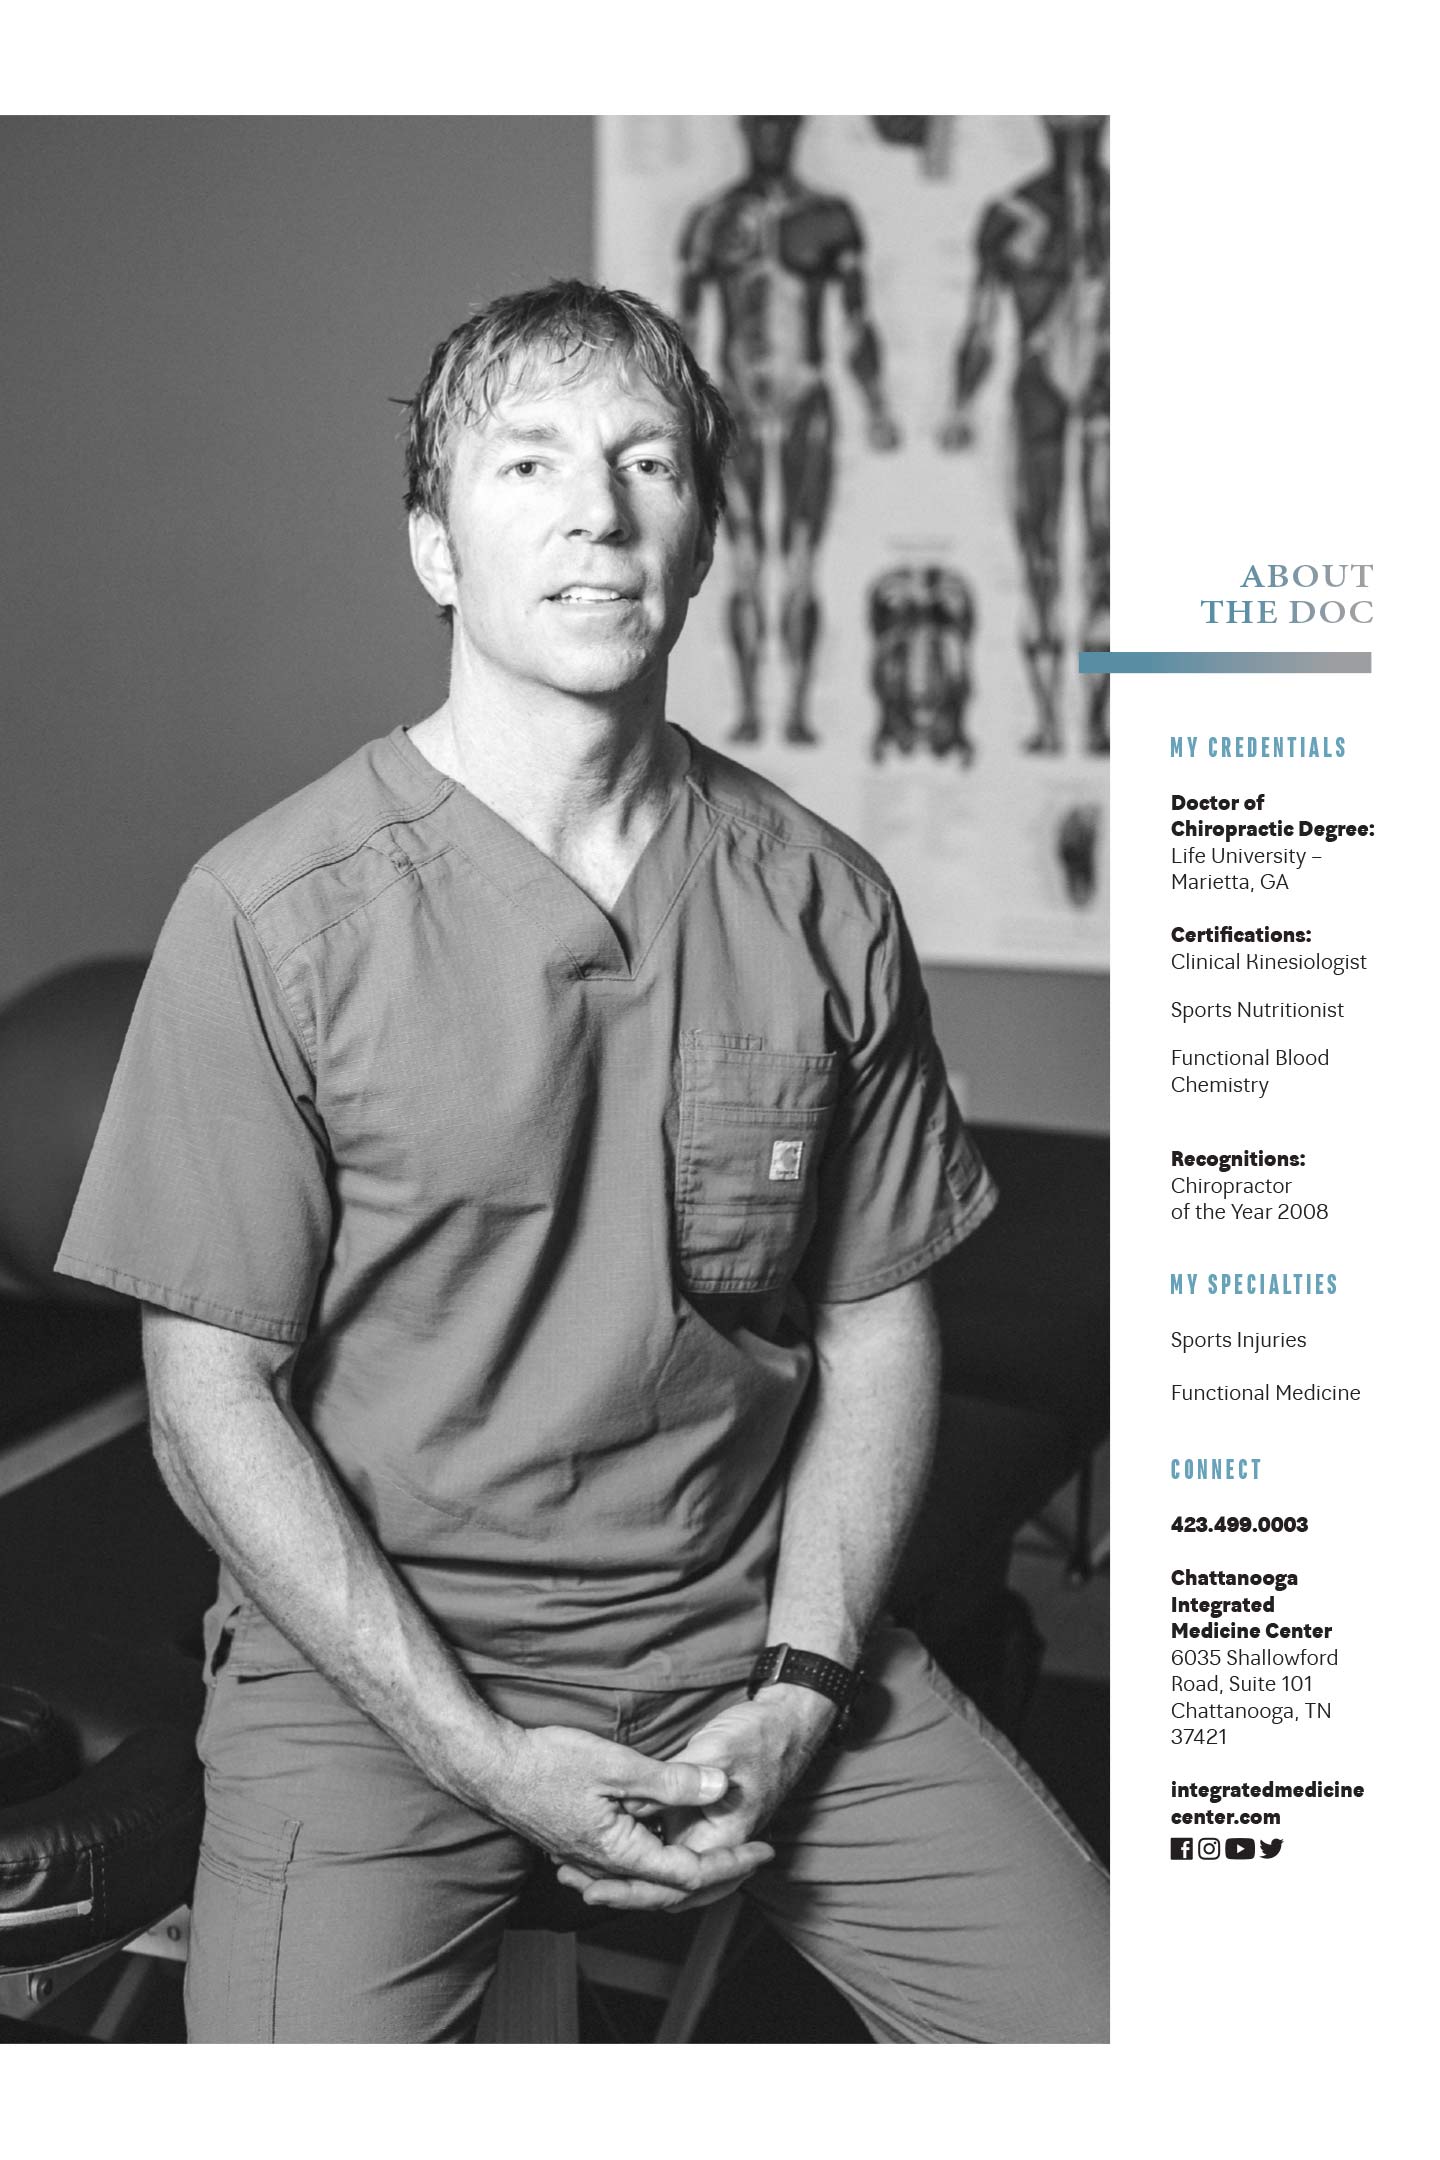 about dr. jeff hall at chattanooga integrated medicine center